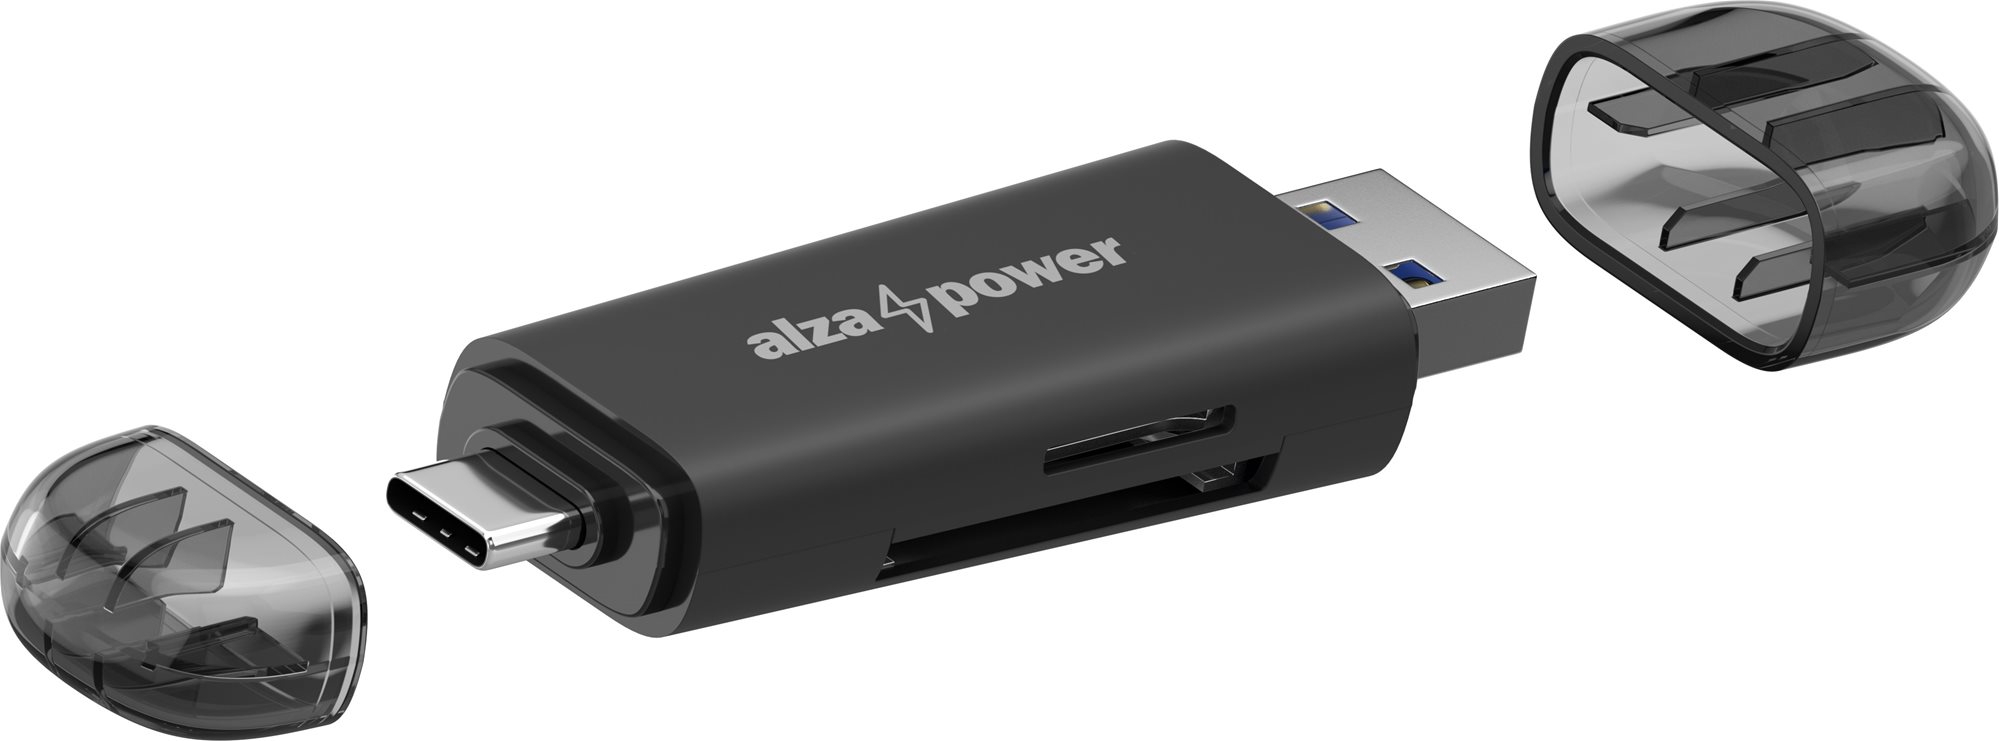 AlzaPower 2in1 Multi-function Memory Card Reader fekete